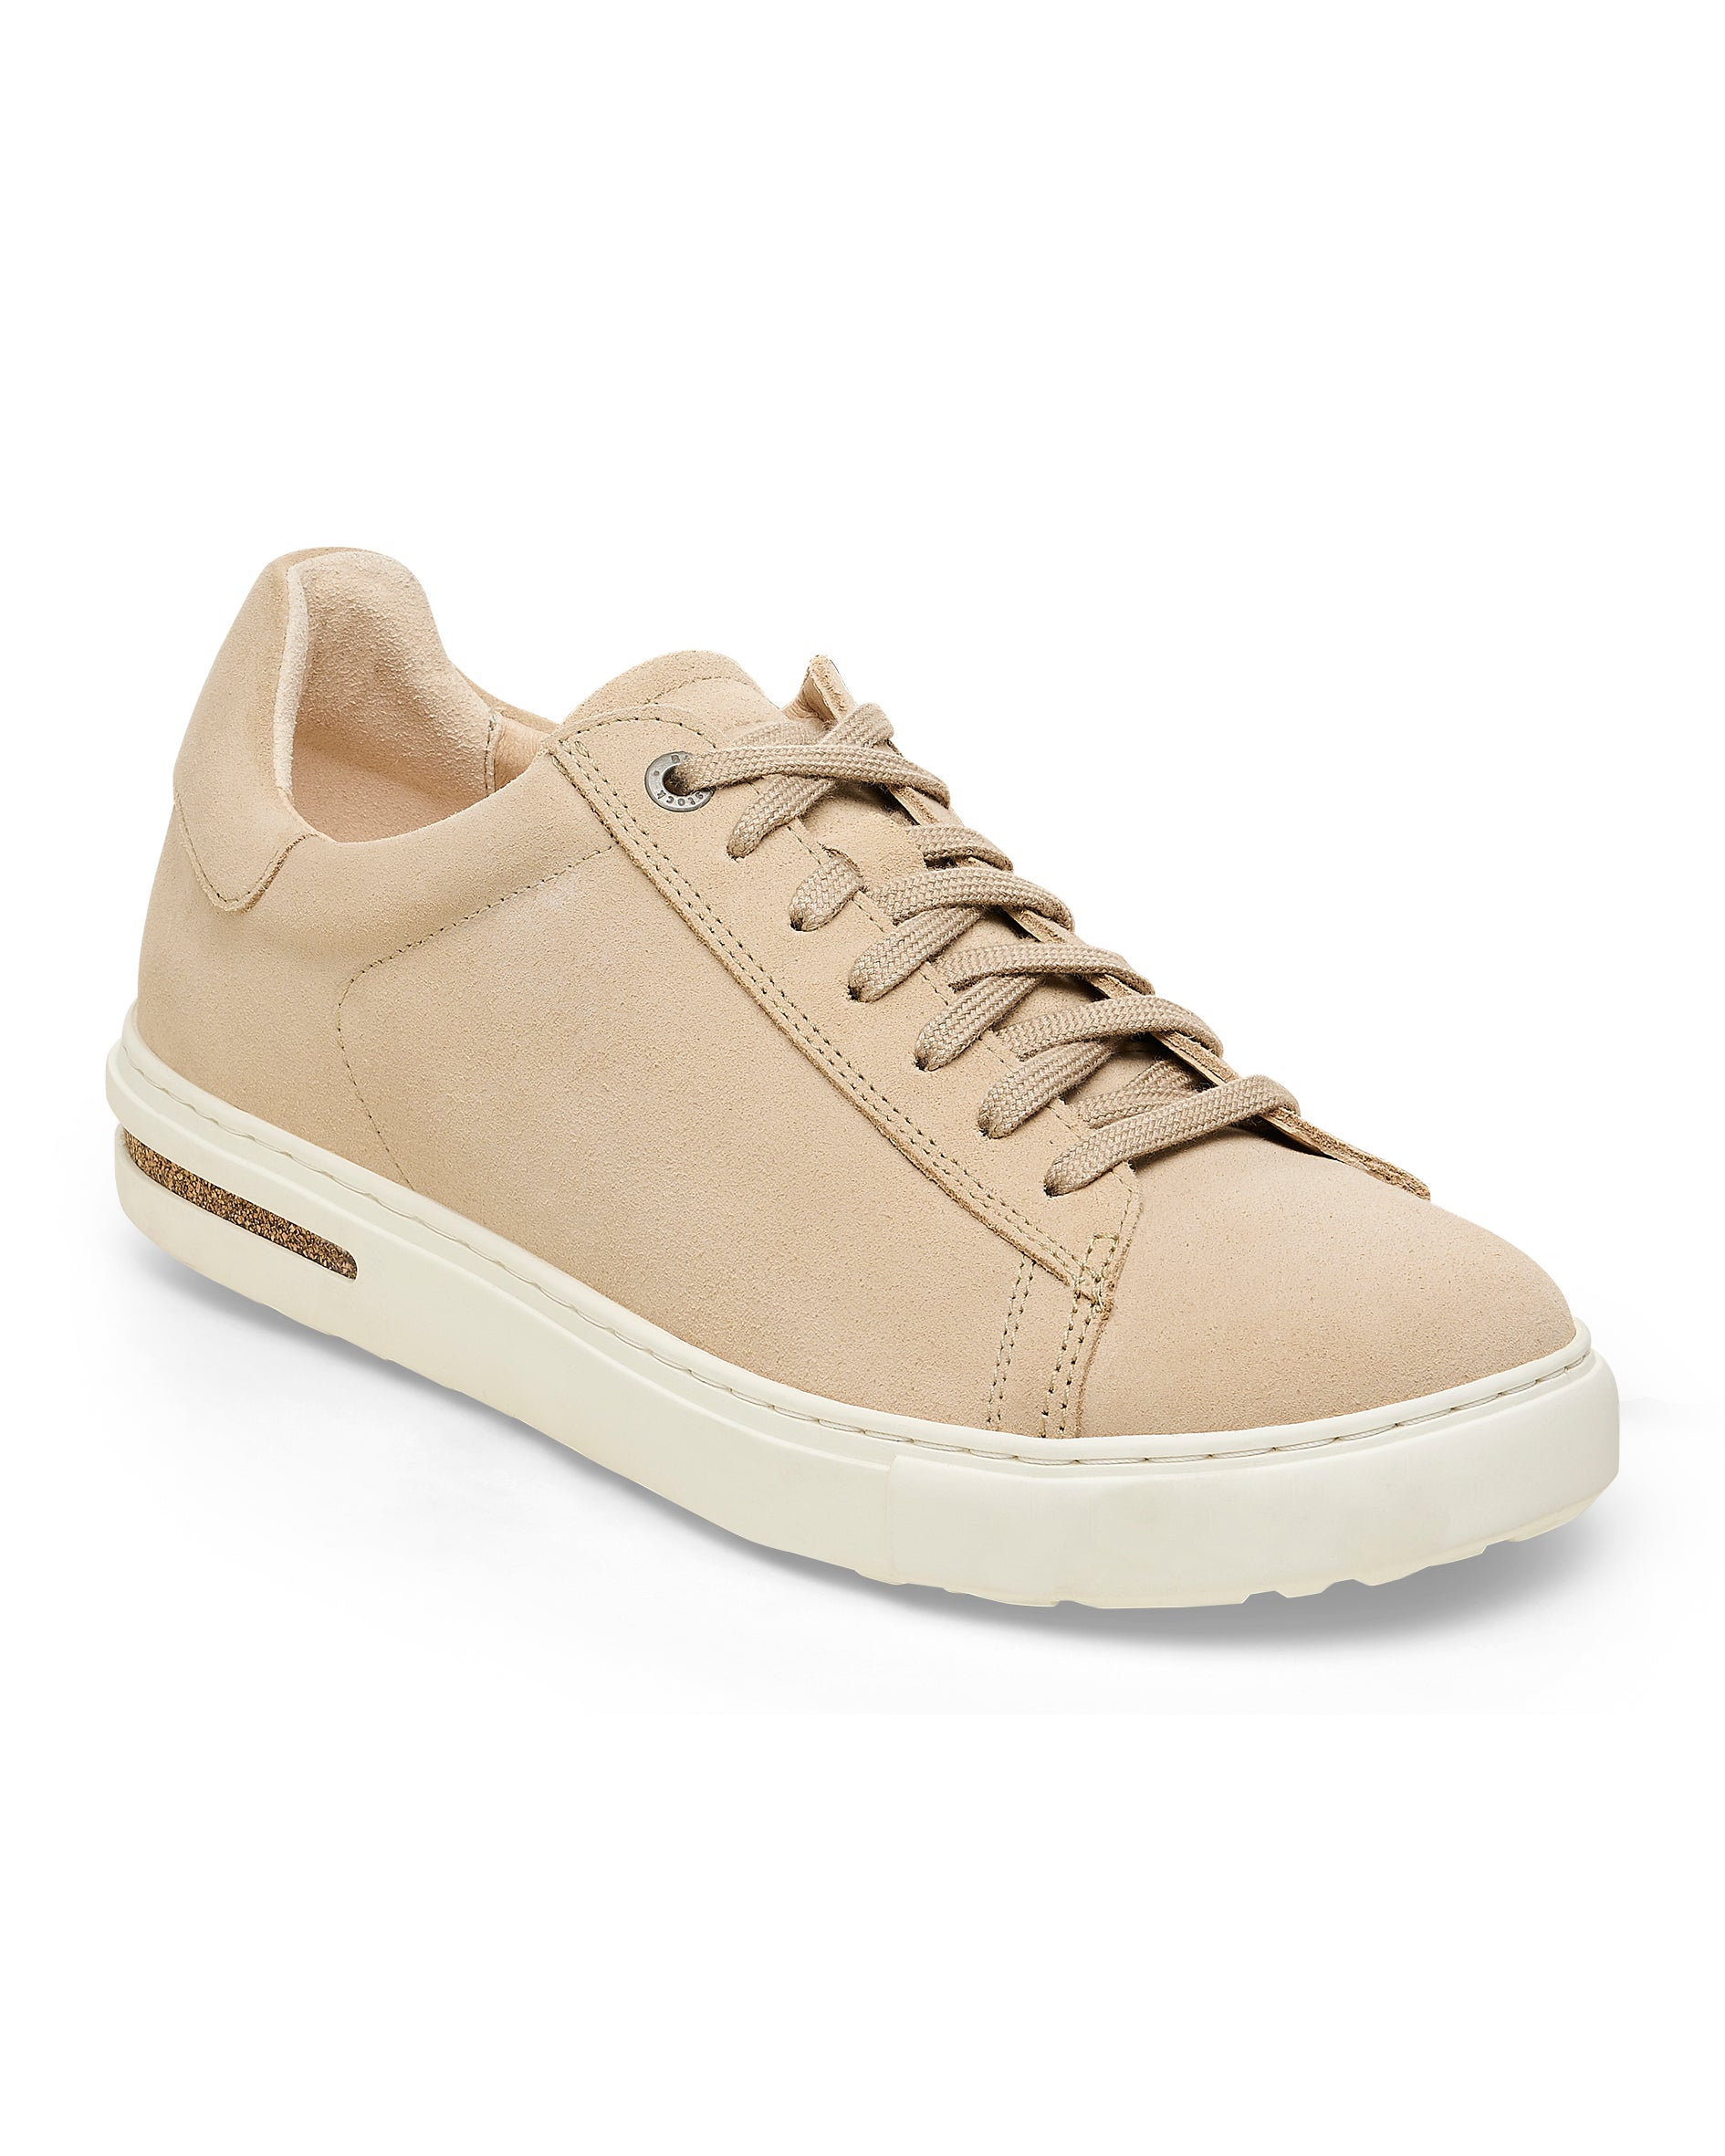 Bend Low Sandcastle Suede Leather Shoes